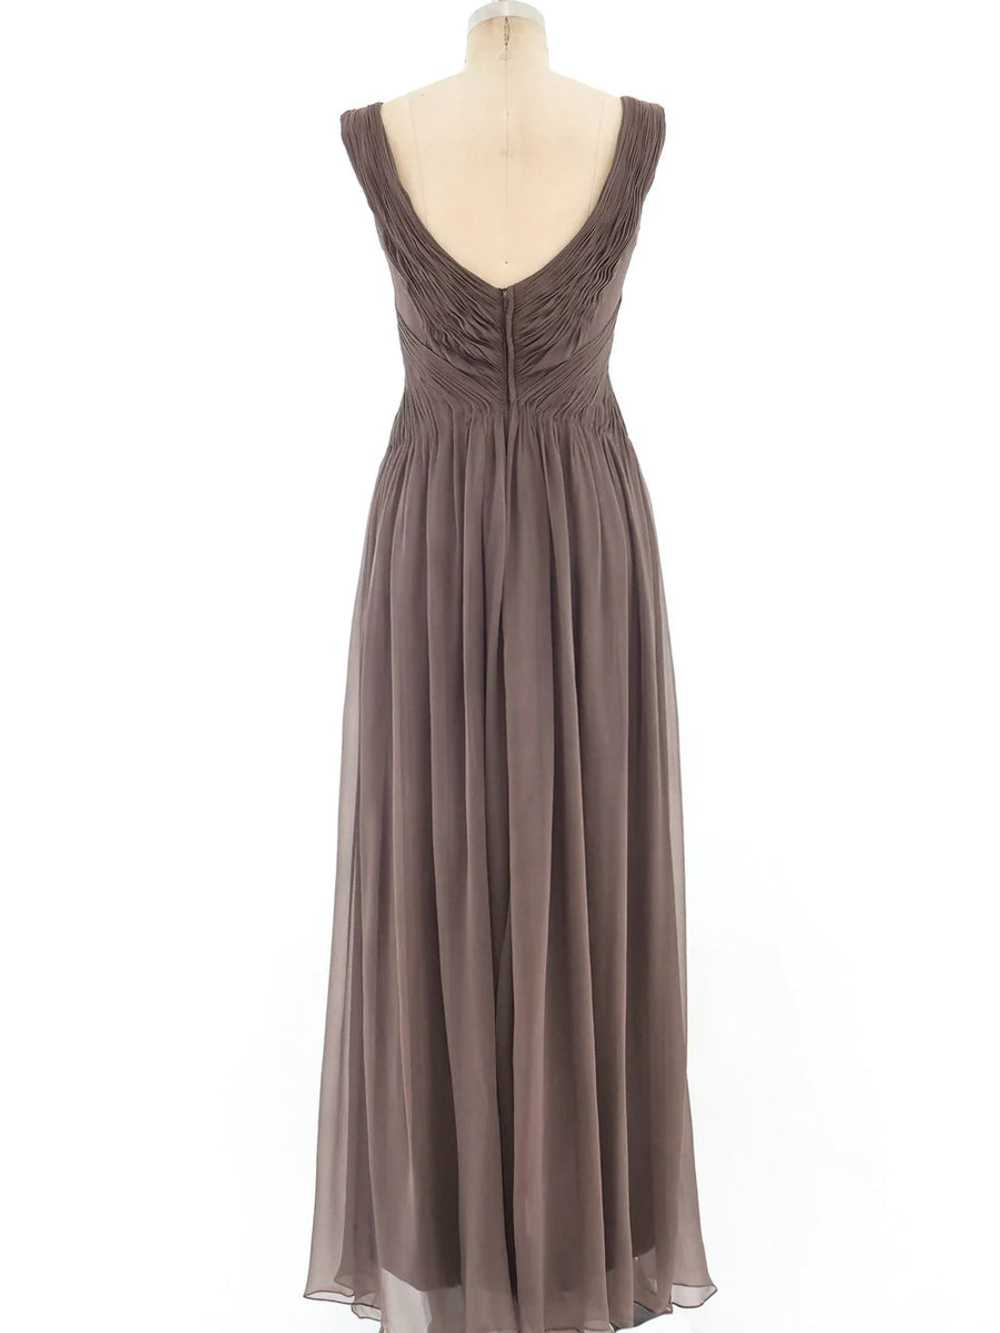 Ruched Silk Chiffon Gown - image 4